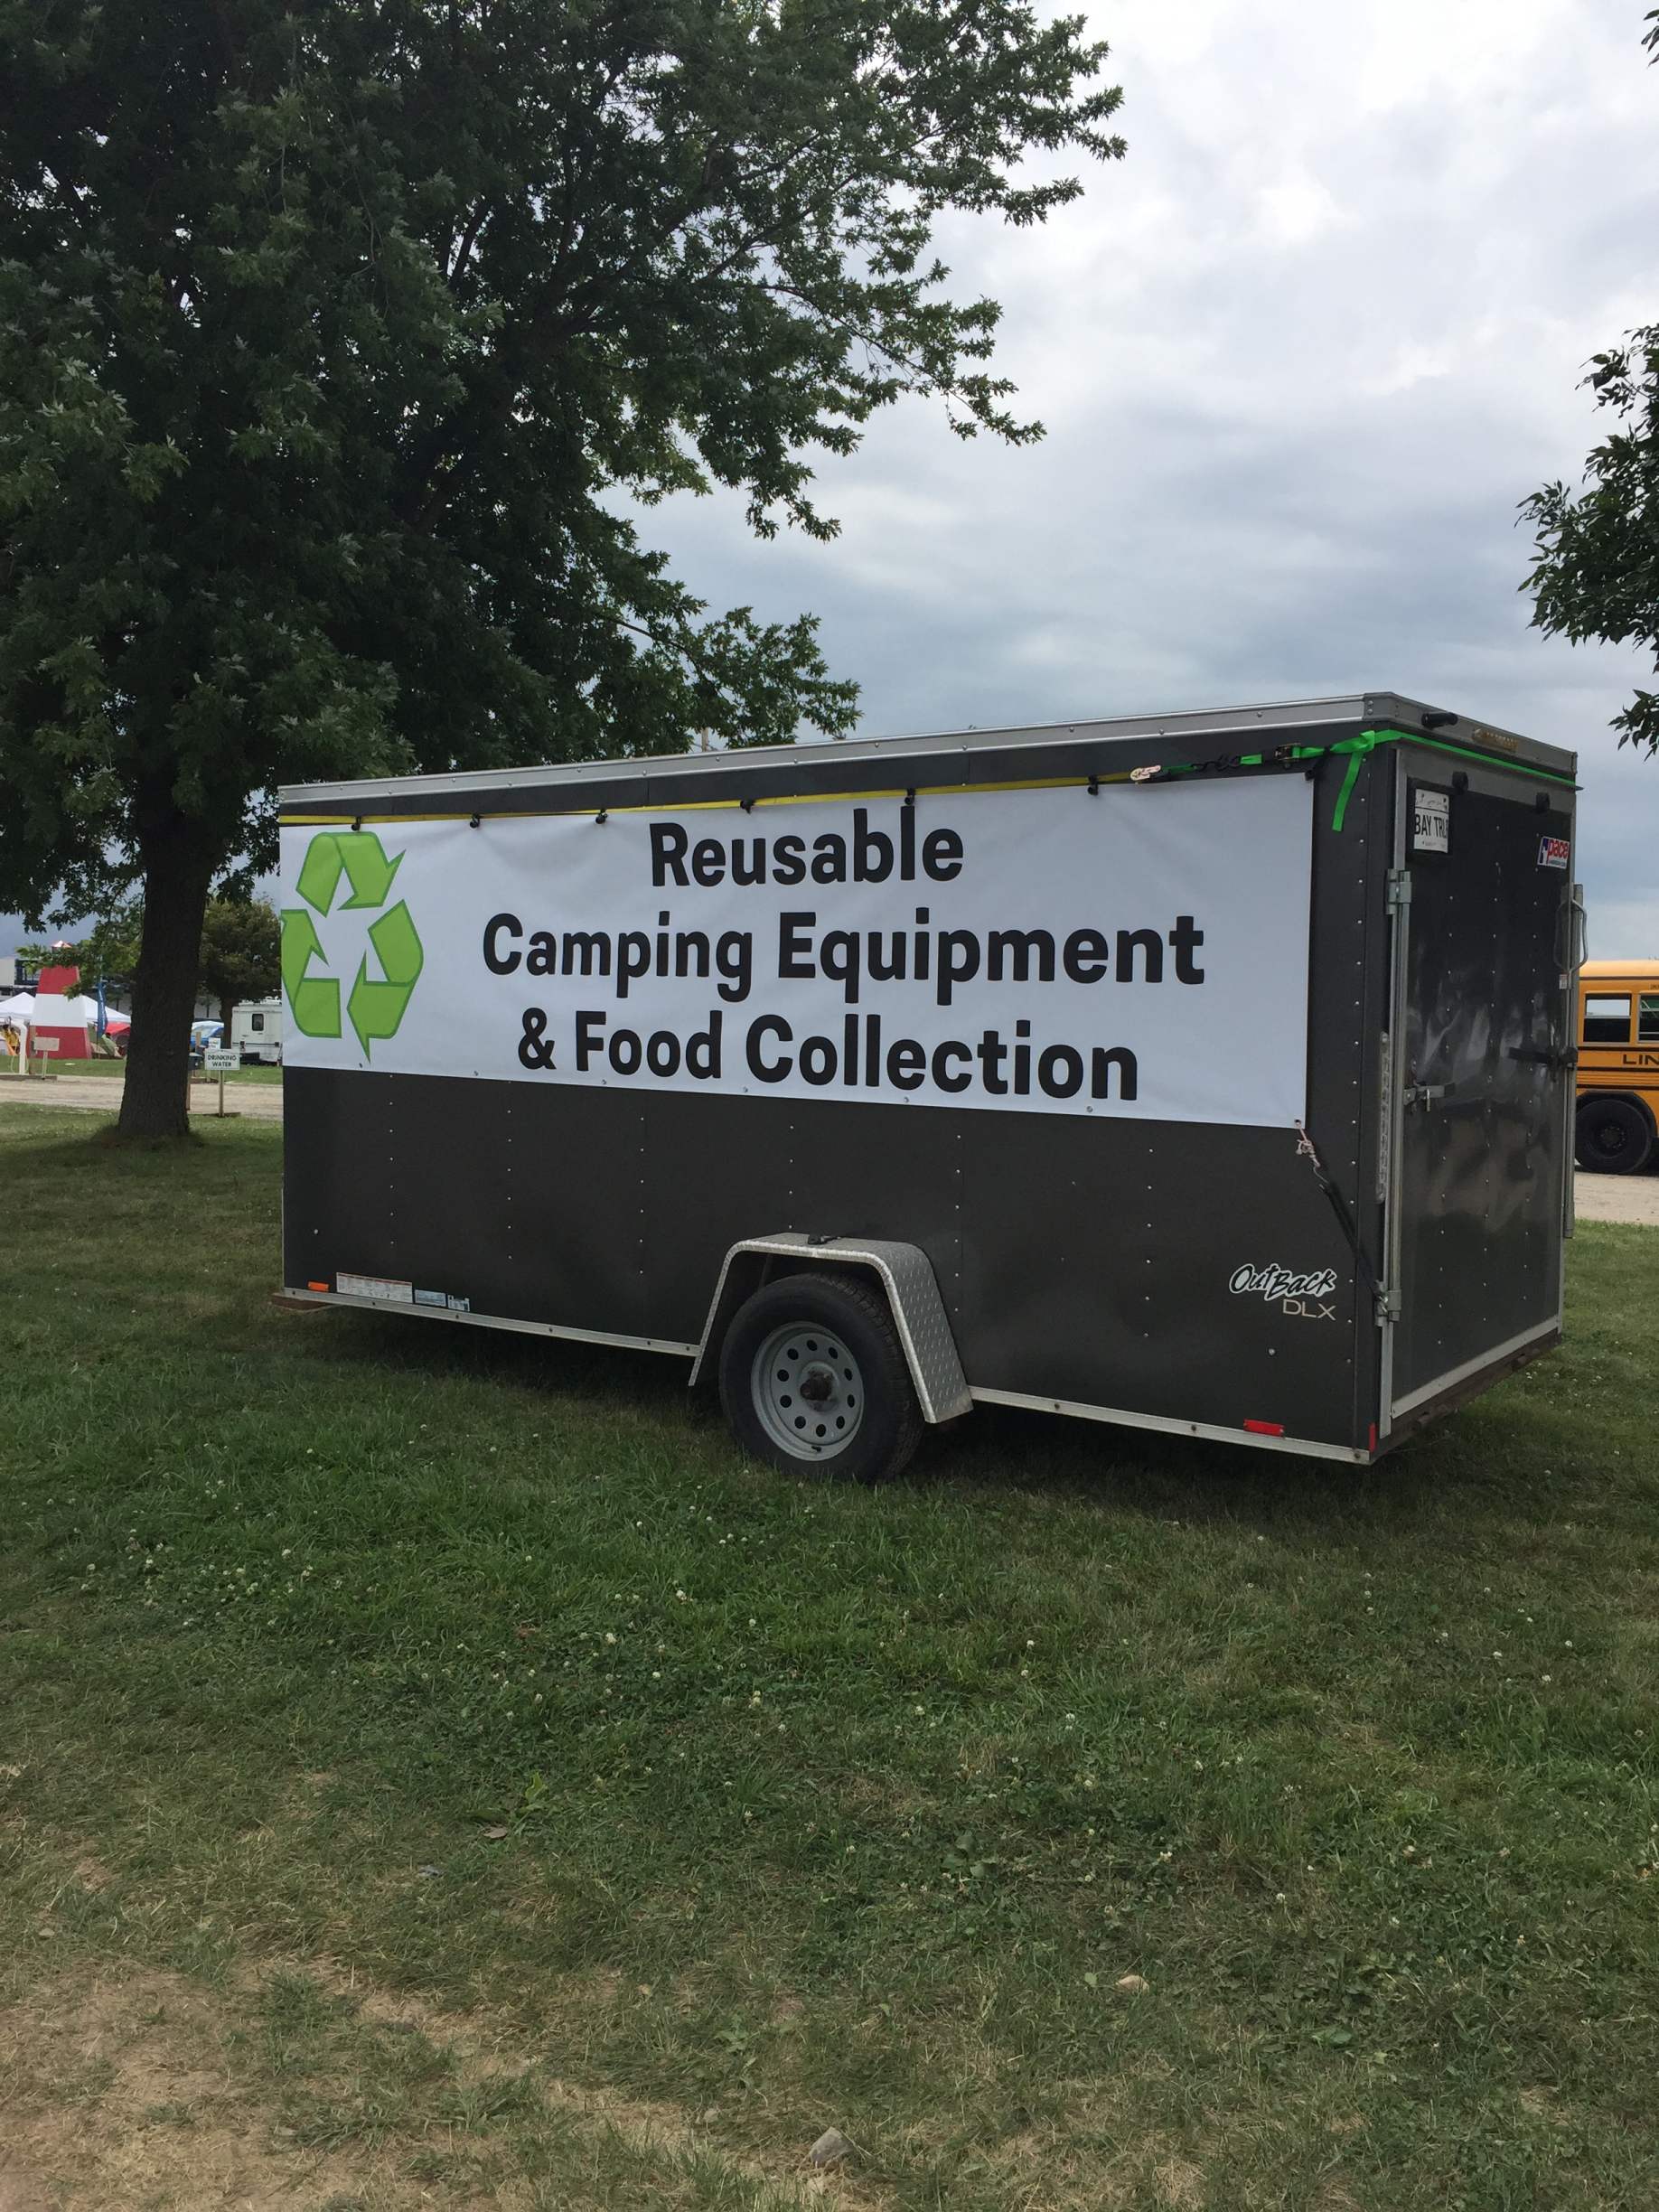 Organizers set up this trailer to collect donated items, including sleeping bags, tents, chairs, and food at the conclusion of the 2019 Pathfinder camporee. Photo provided by Lake Union Herald